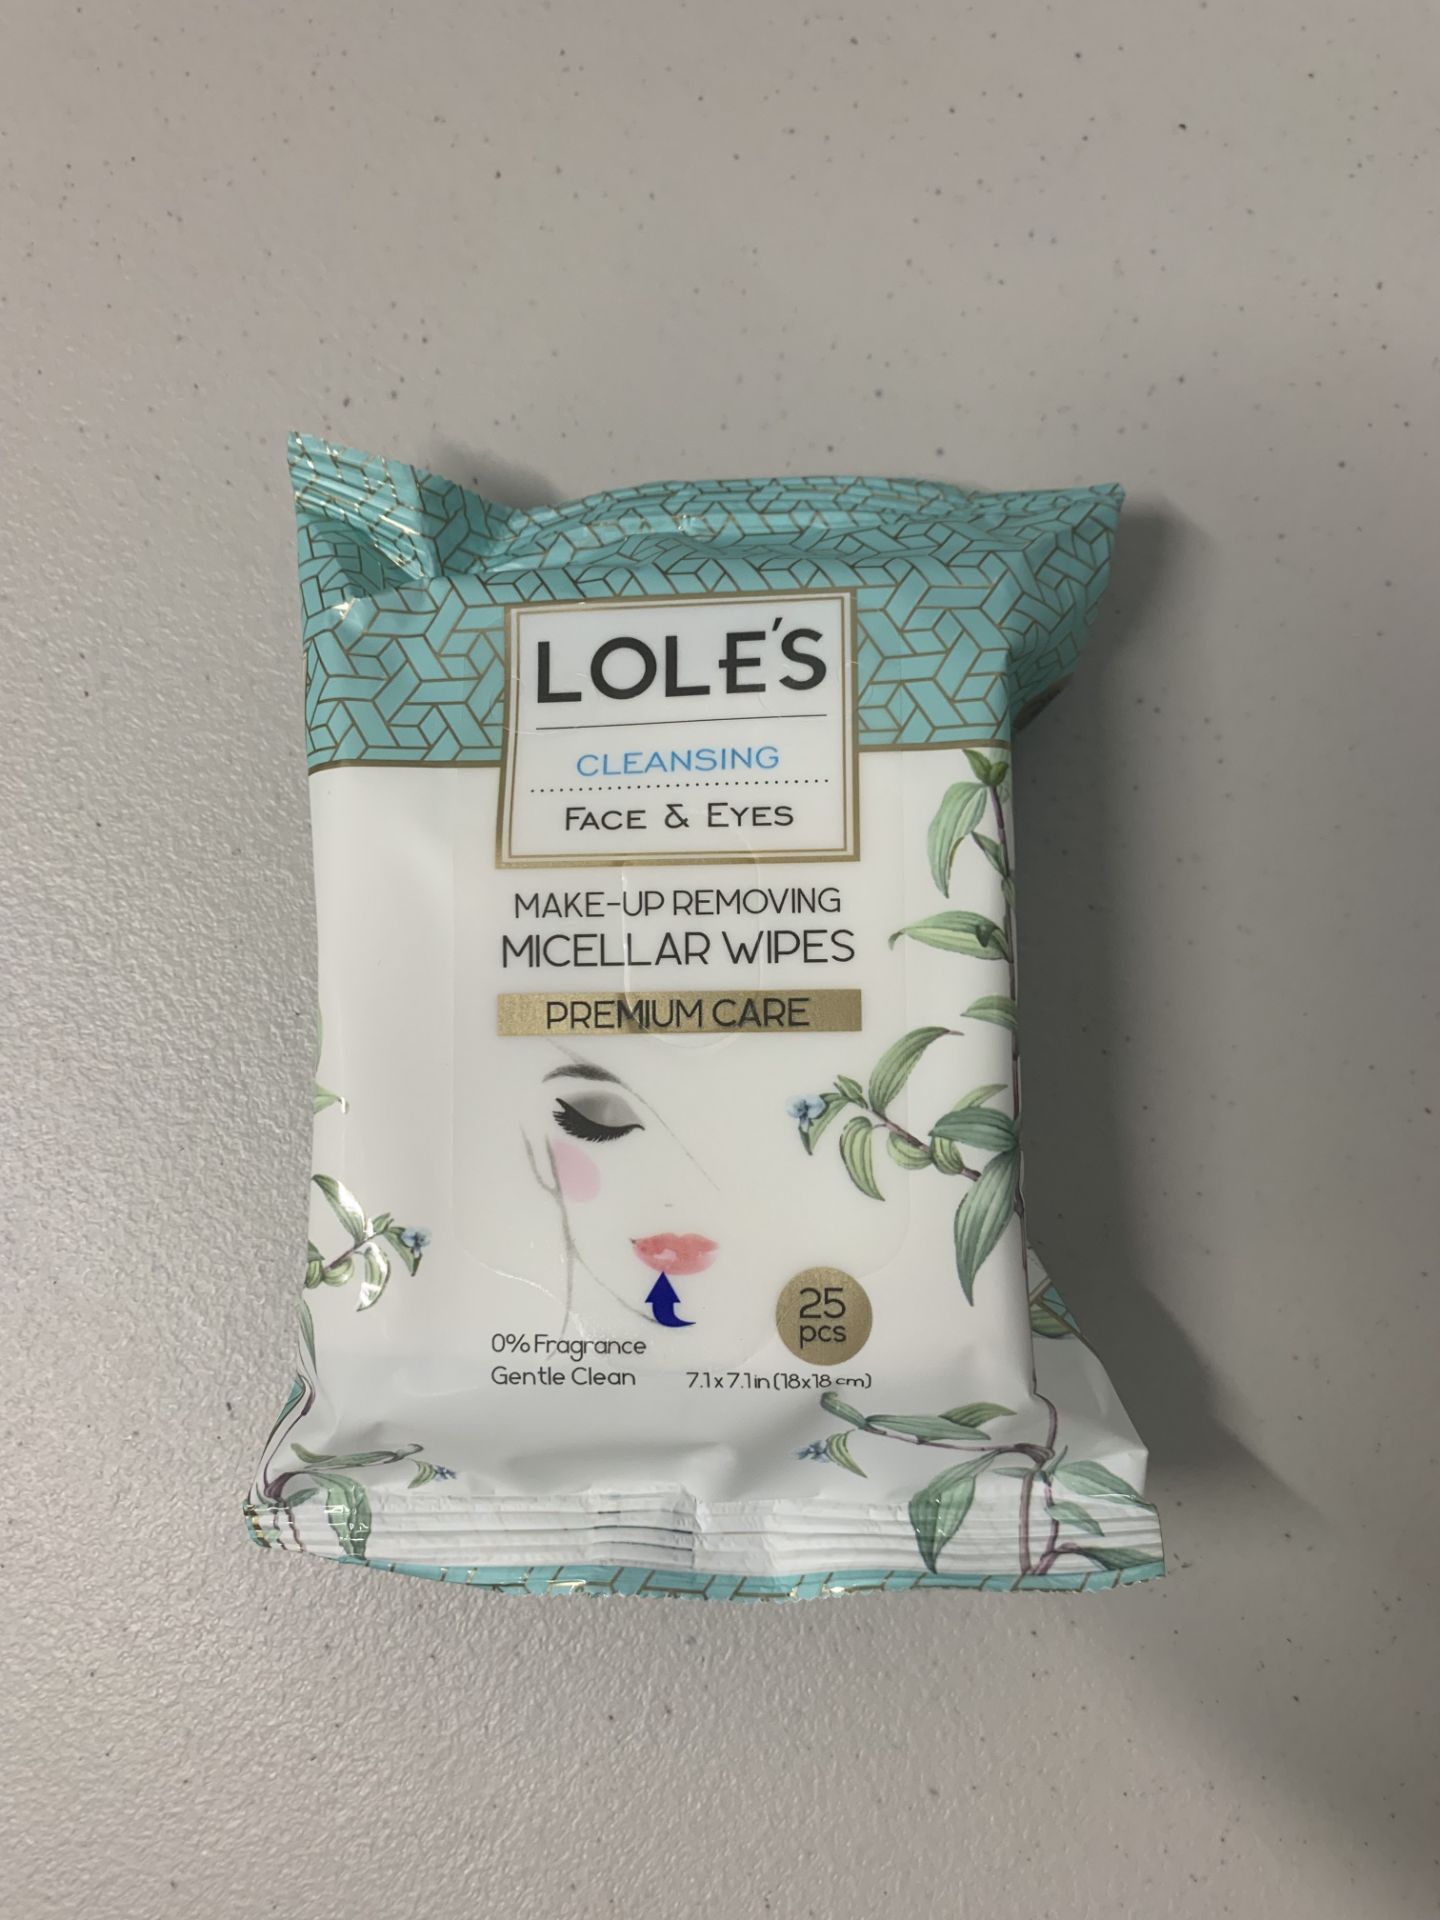 24 x Make-up Removing Micellar Wipes LOLE'S - Image 5 of 5